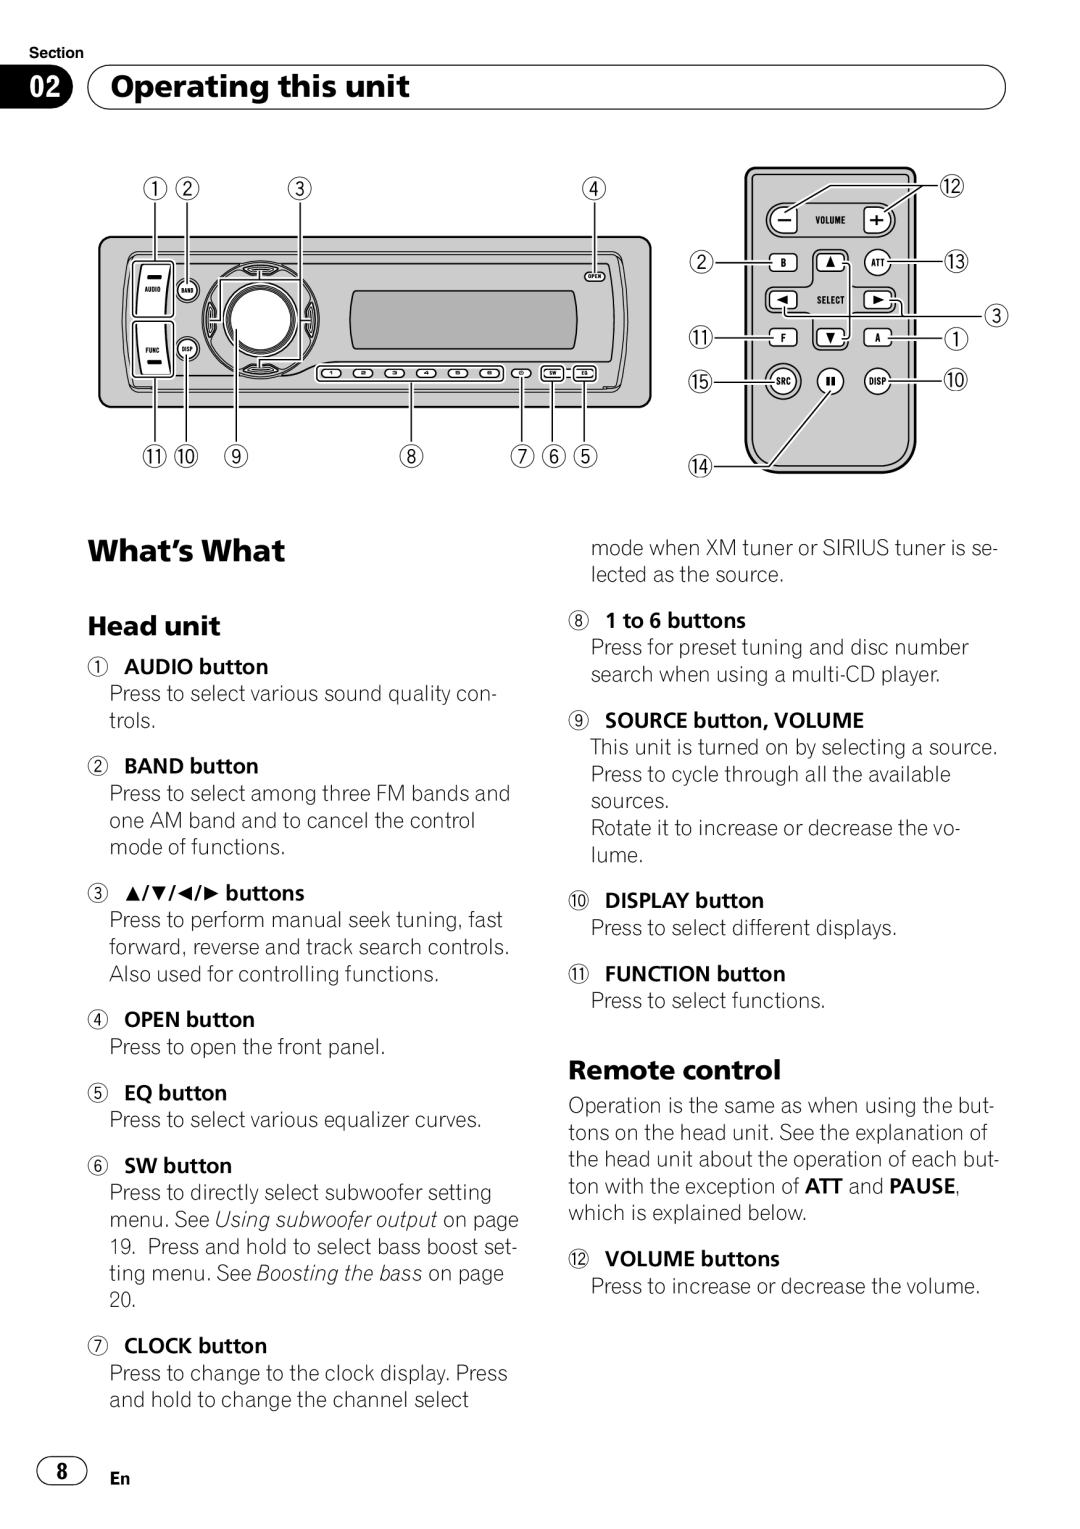 Pioneer SRC7127-B/N operation manual Operating this unit, What’s What, Head unit, Remote control 